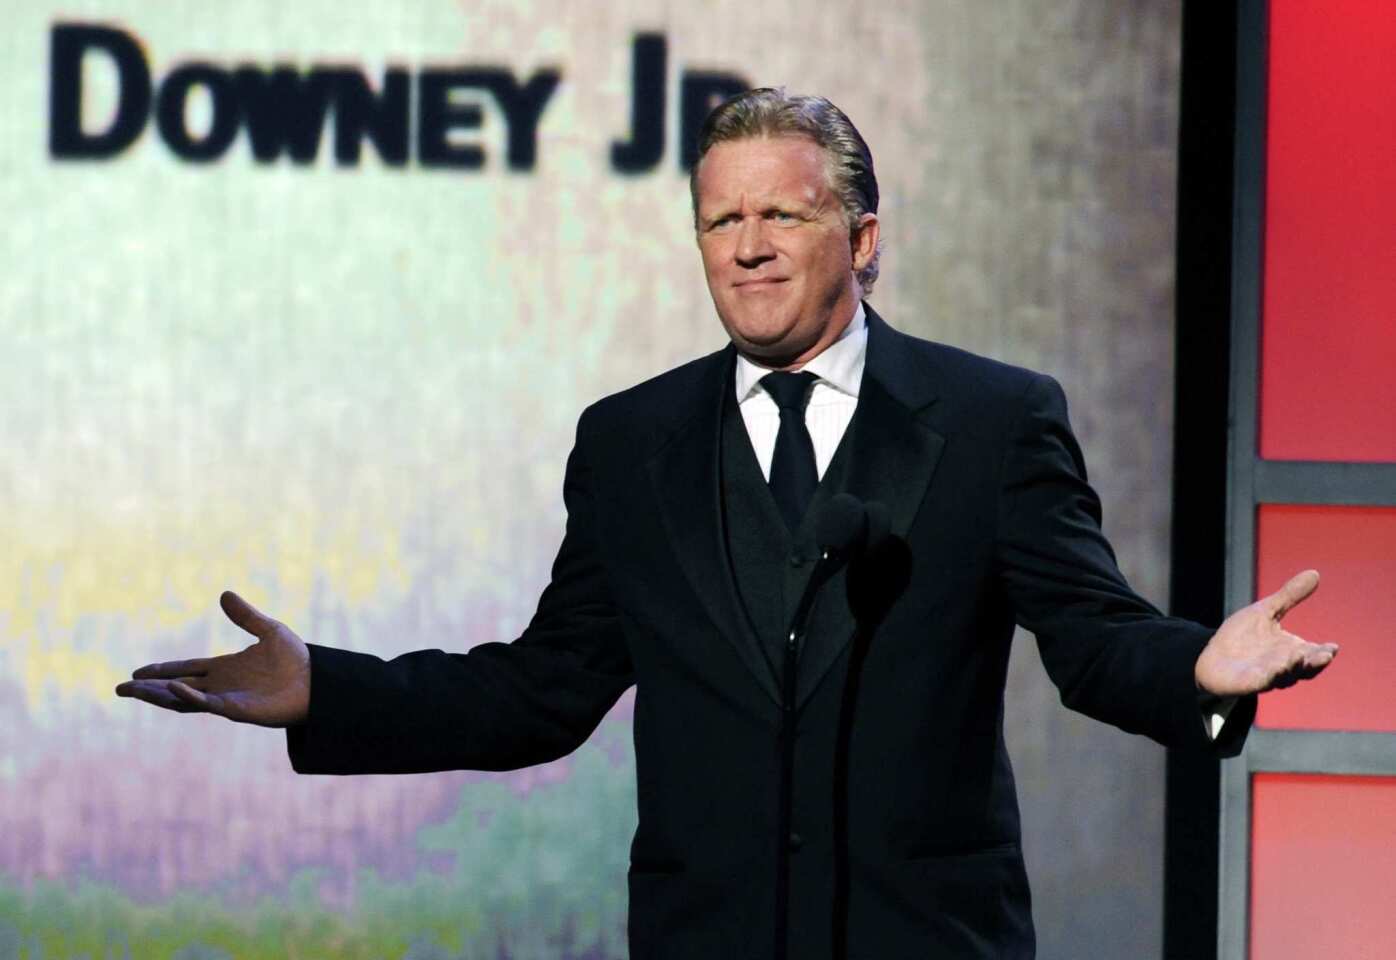 Anthony Michael Hall, who worked with Robert Downey Jr. in 1985's "Weird Science," speaks at the award ceremony.